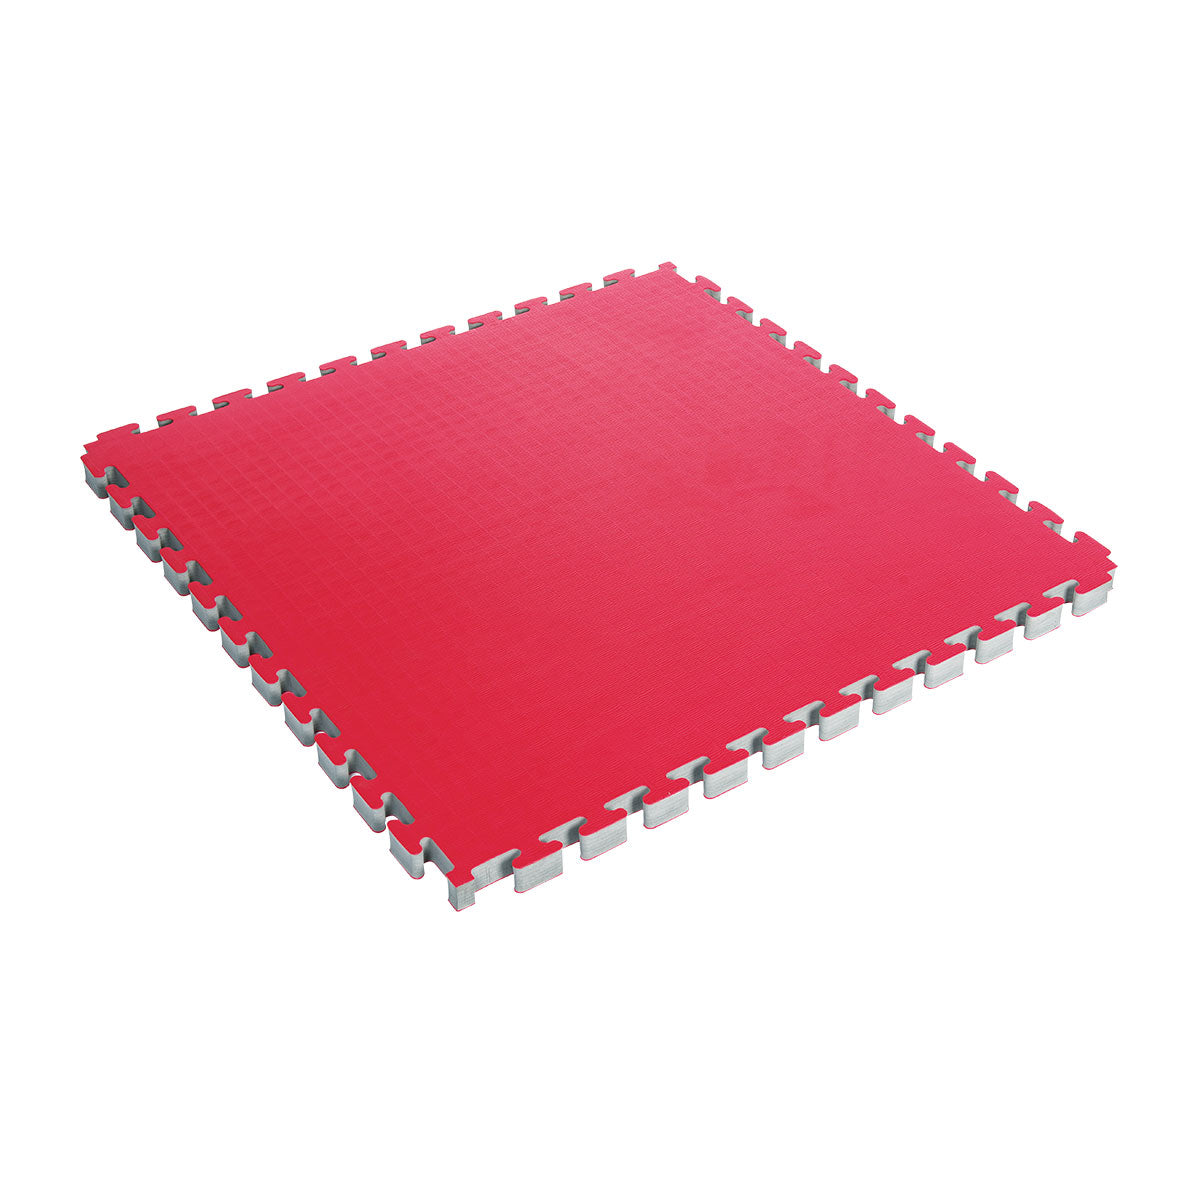 2" Thick Puzzle Mat 1.5" Red Black